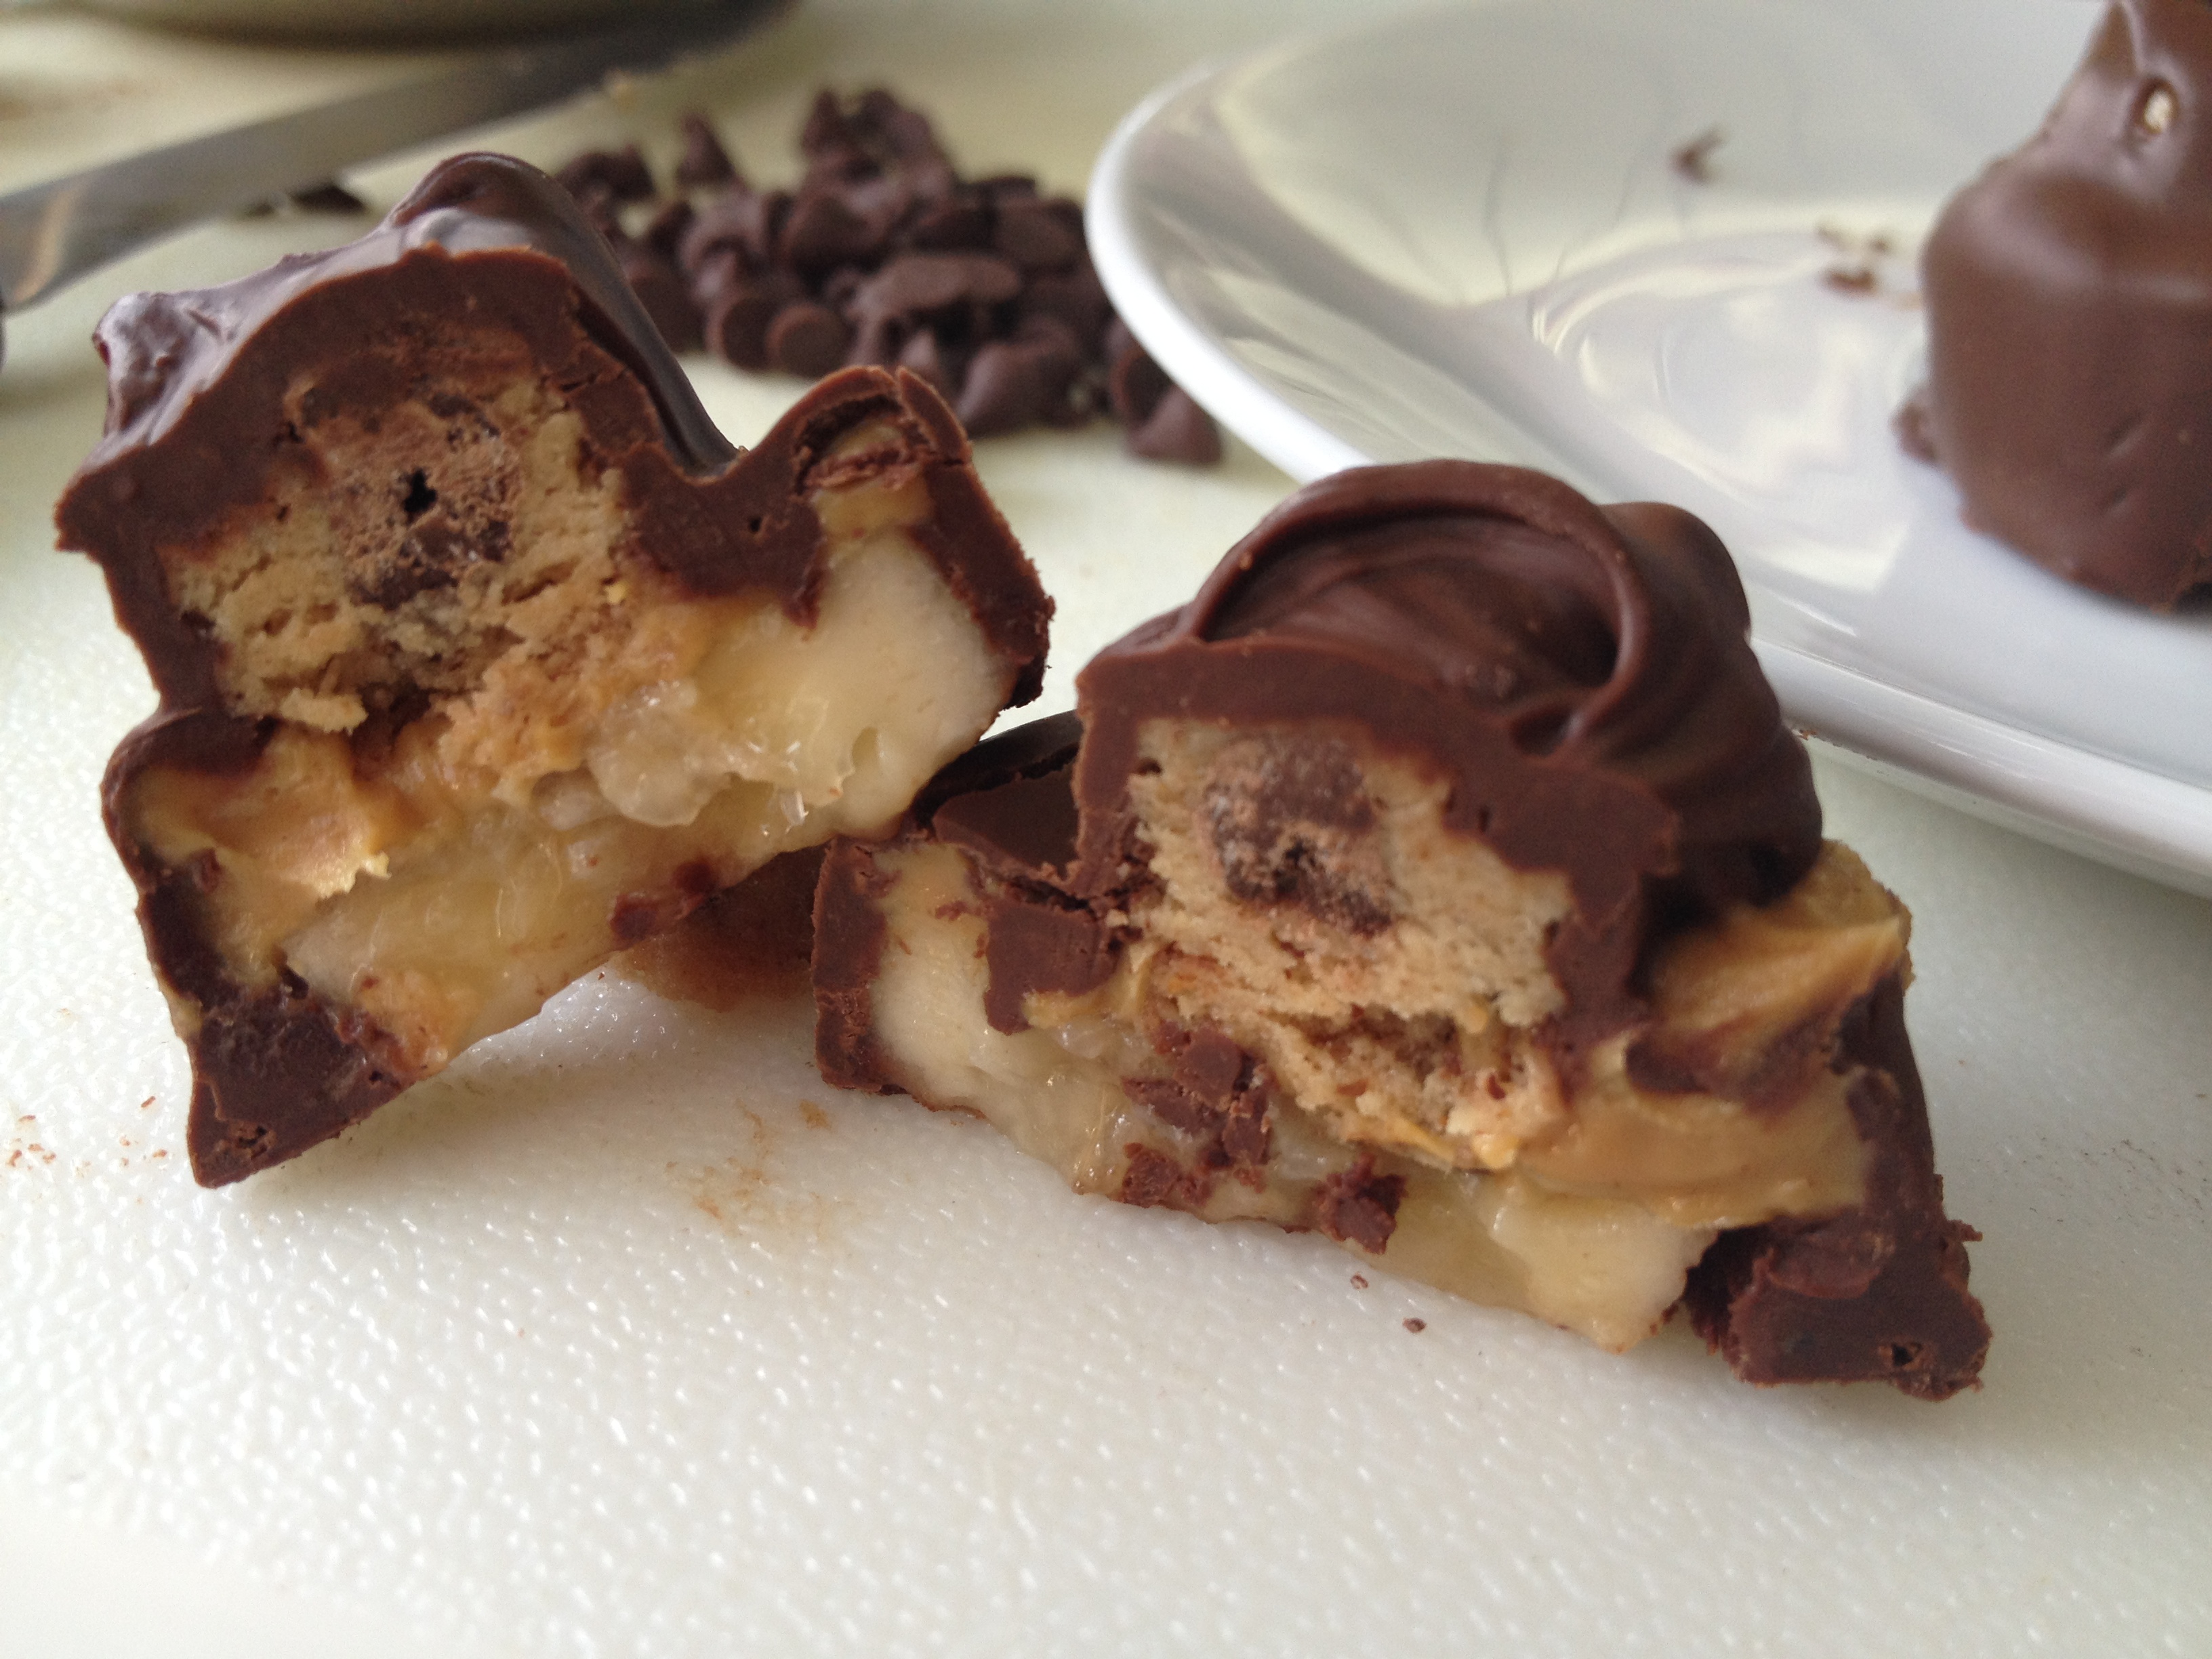 Chocolate Protein Cookie Dough Bites with Banana and Peanut Butter